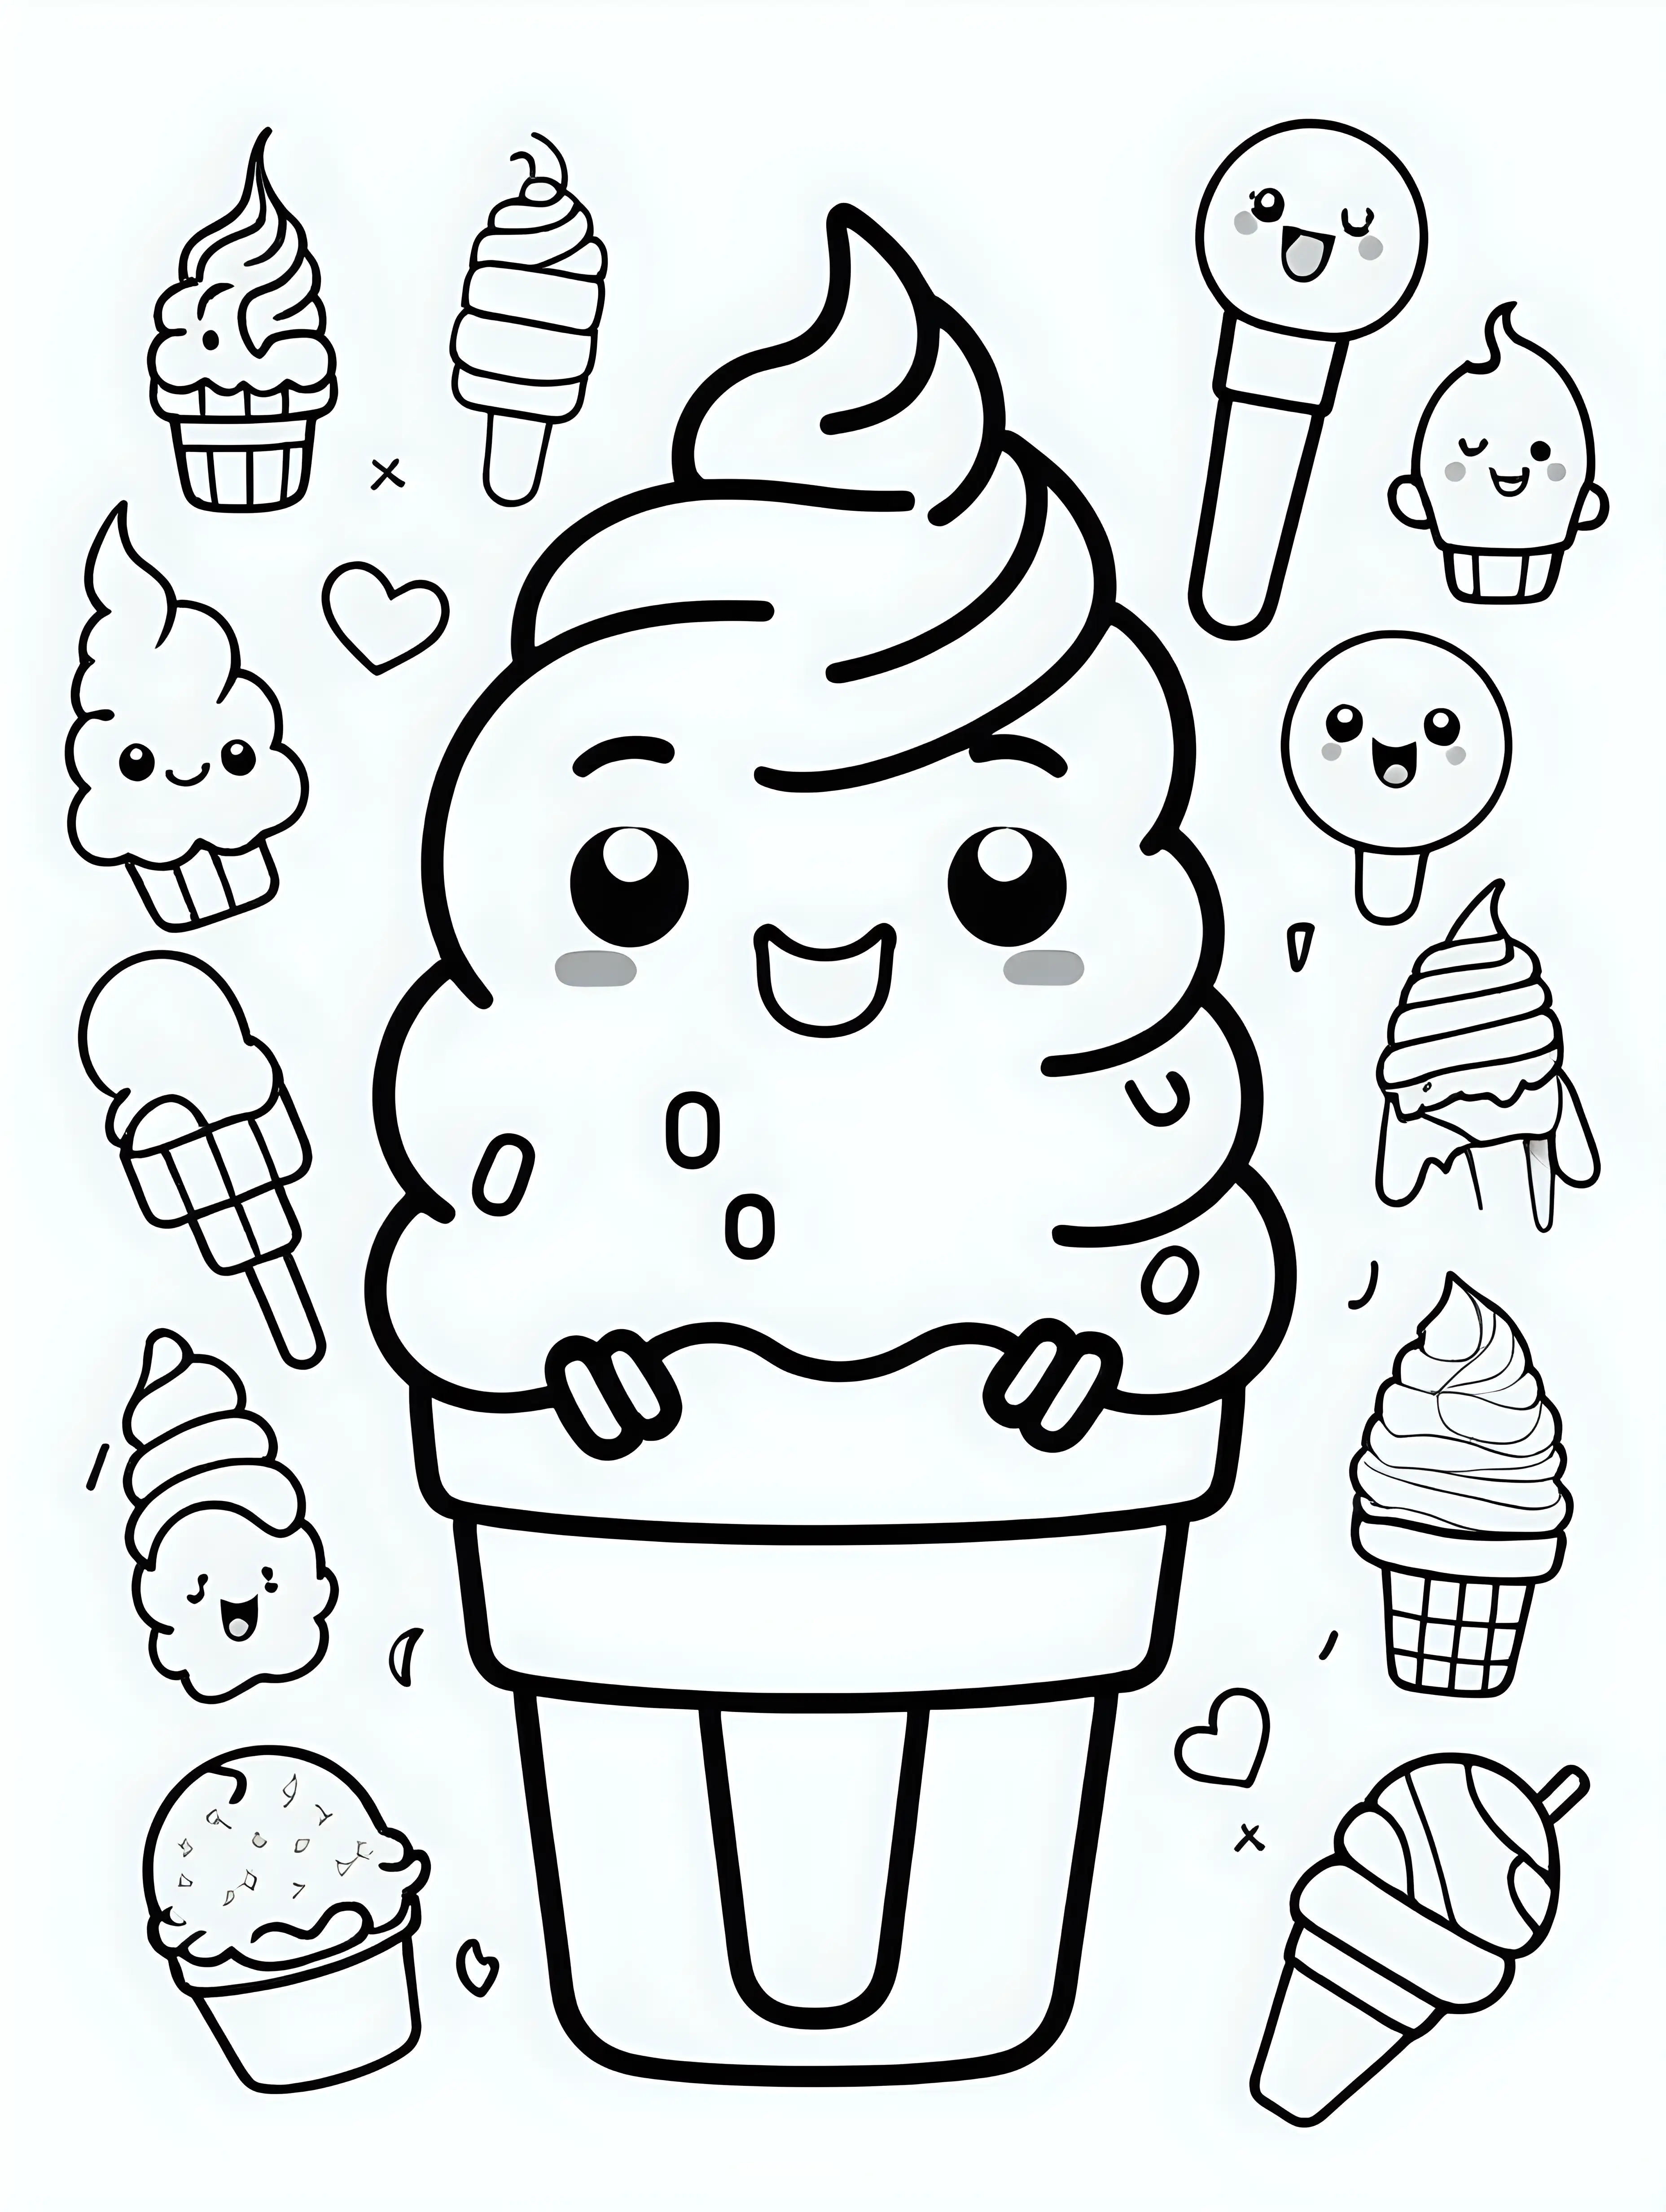 Adorable Cartoon Coloring Cute Ice Cream and Emojis on a Clean White Background